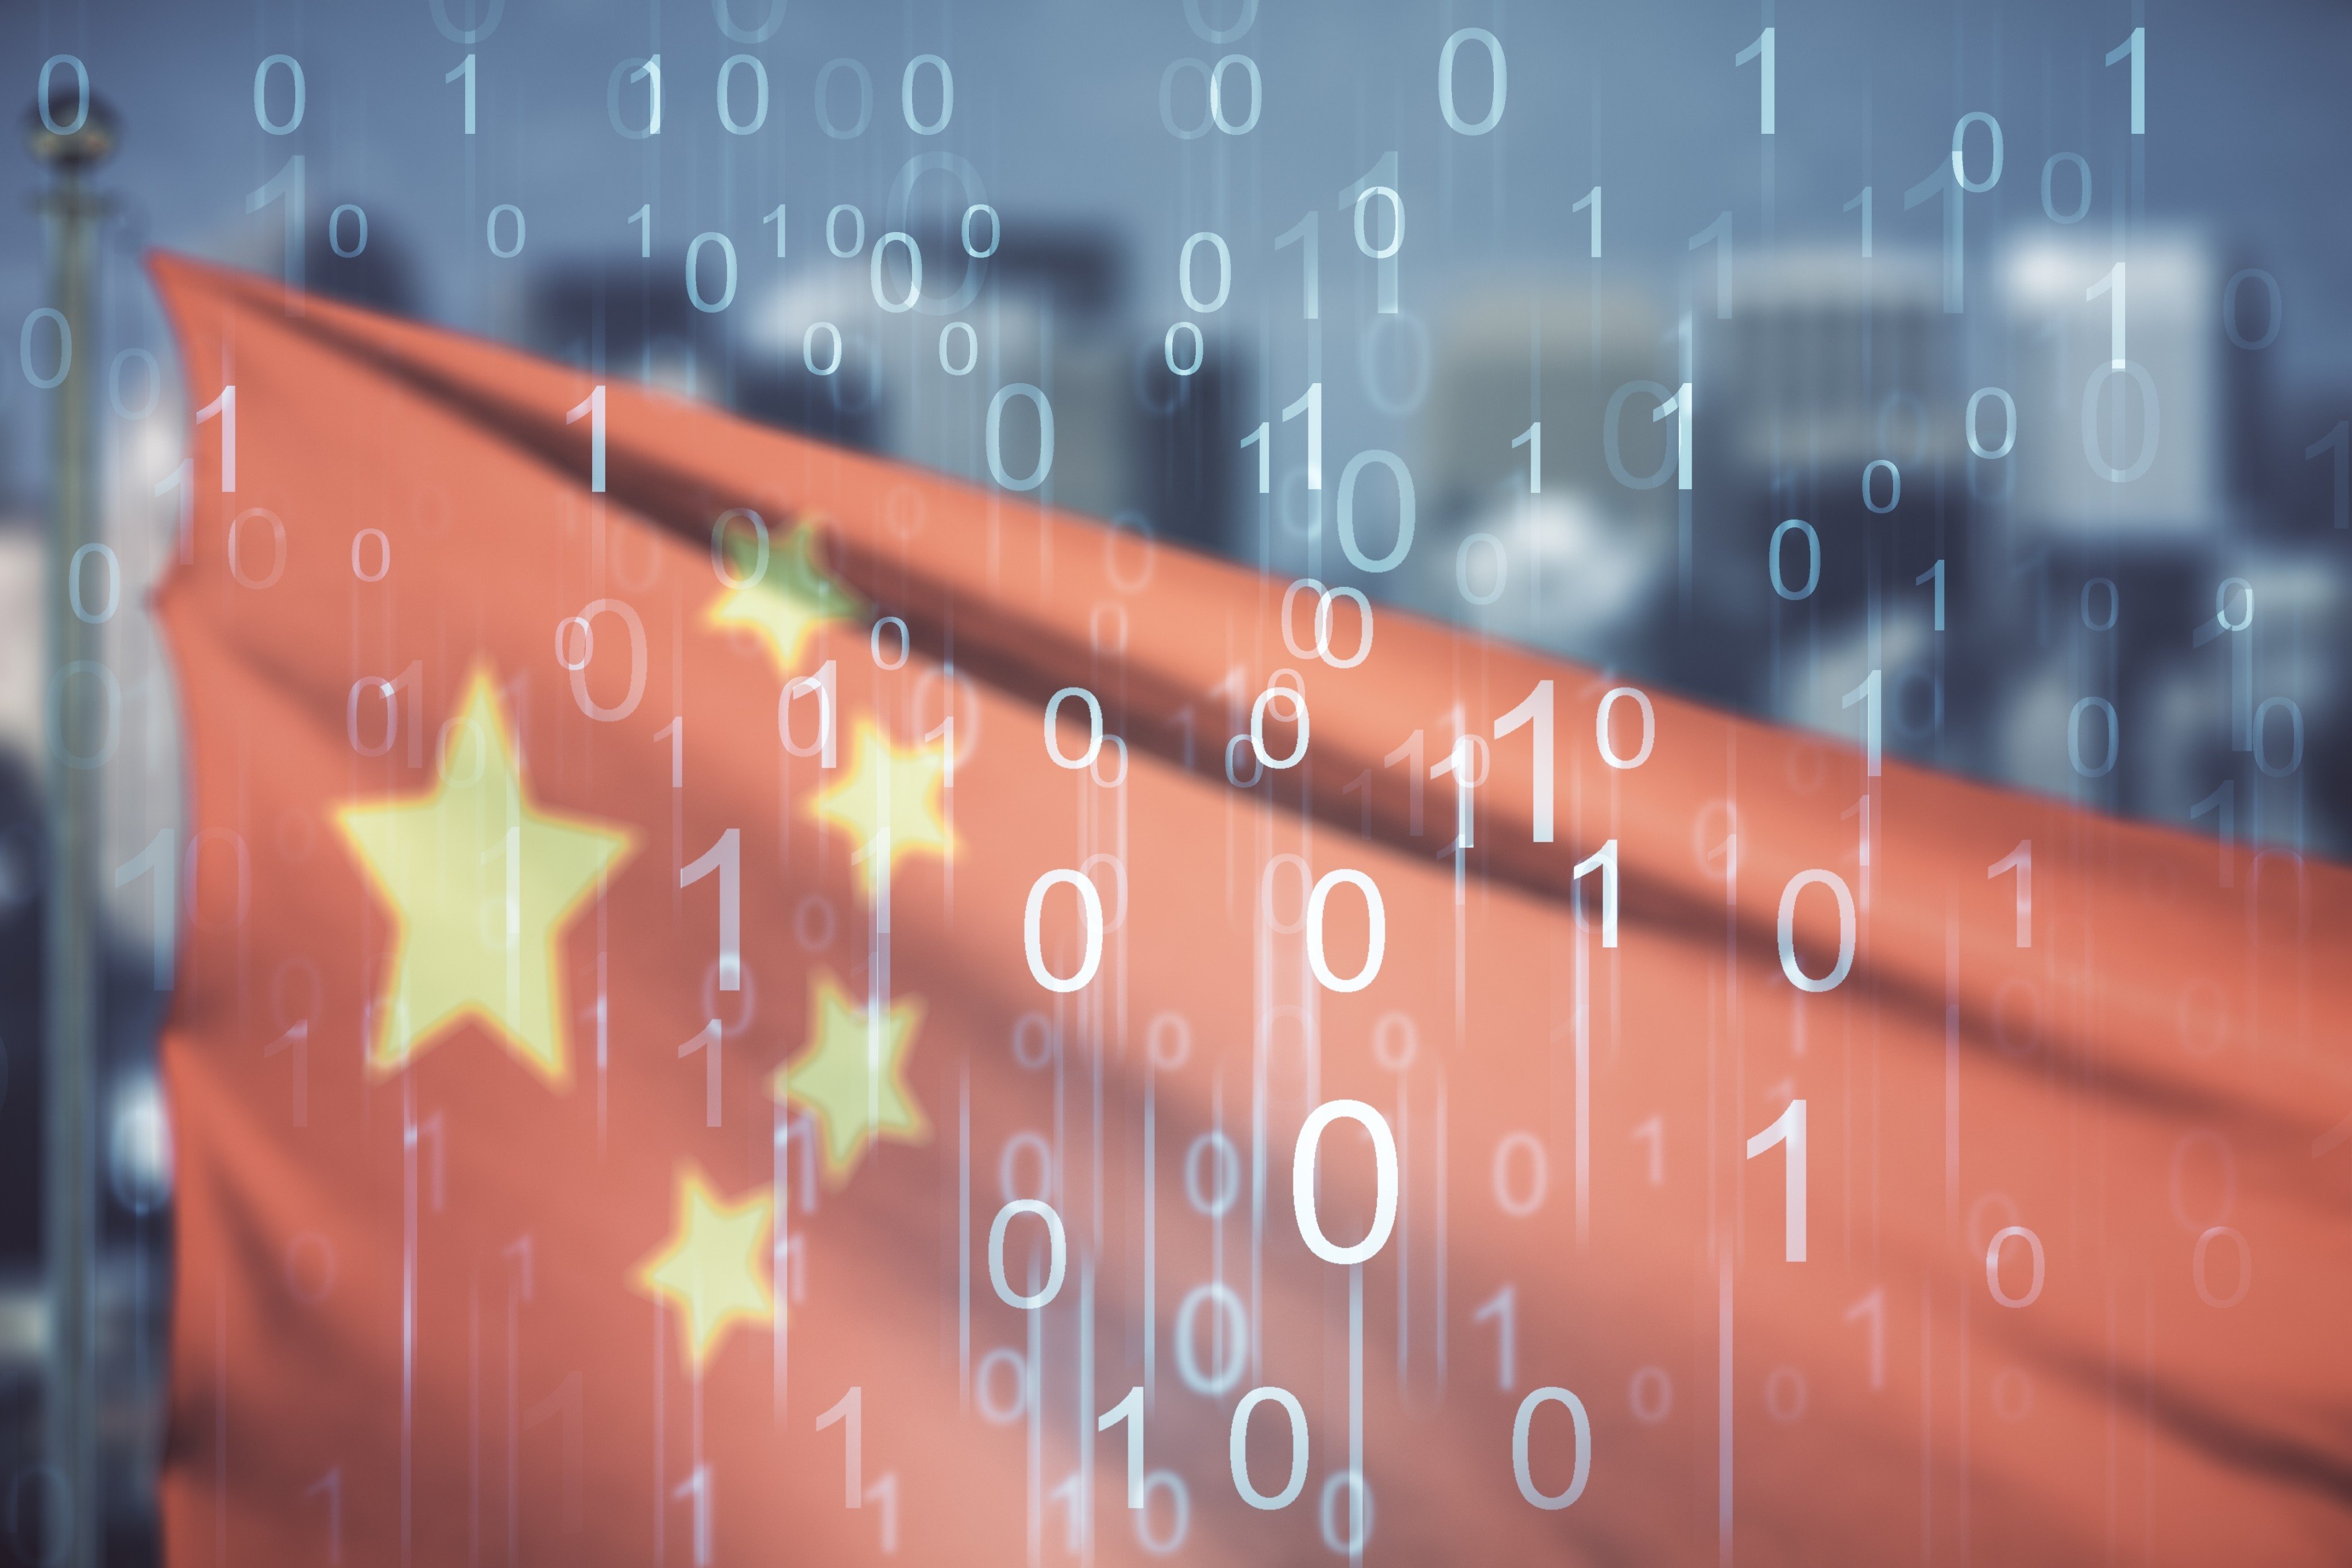 China’s local governments are attempting to classify their vast stores of data as assets to help relieve debt burdens. Photo: Shutterstock